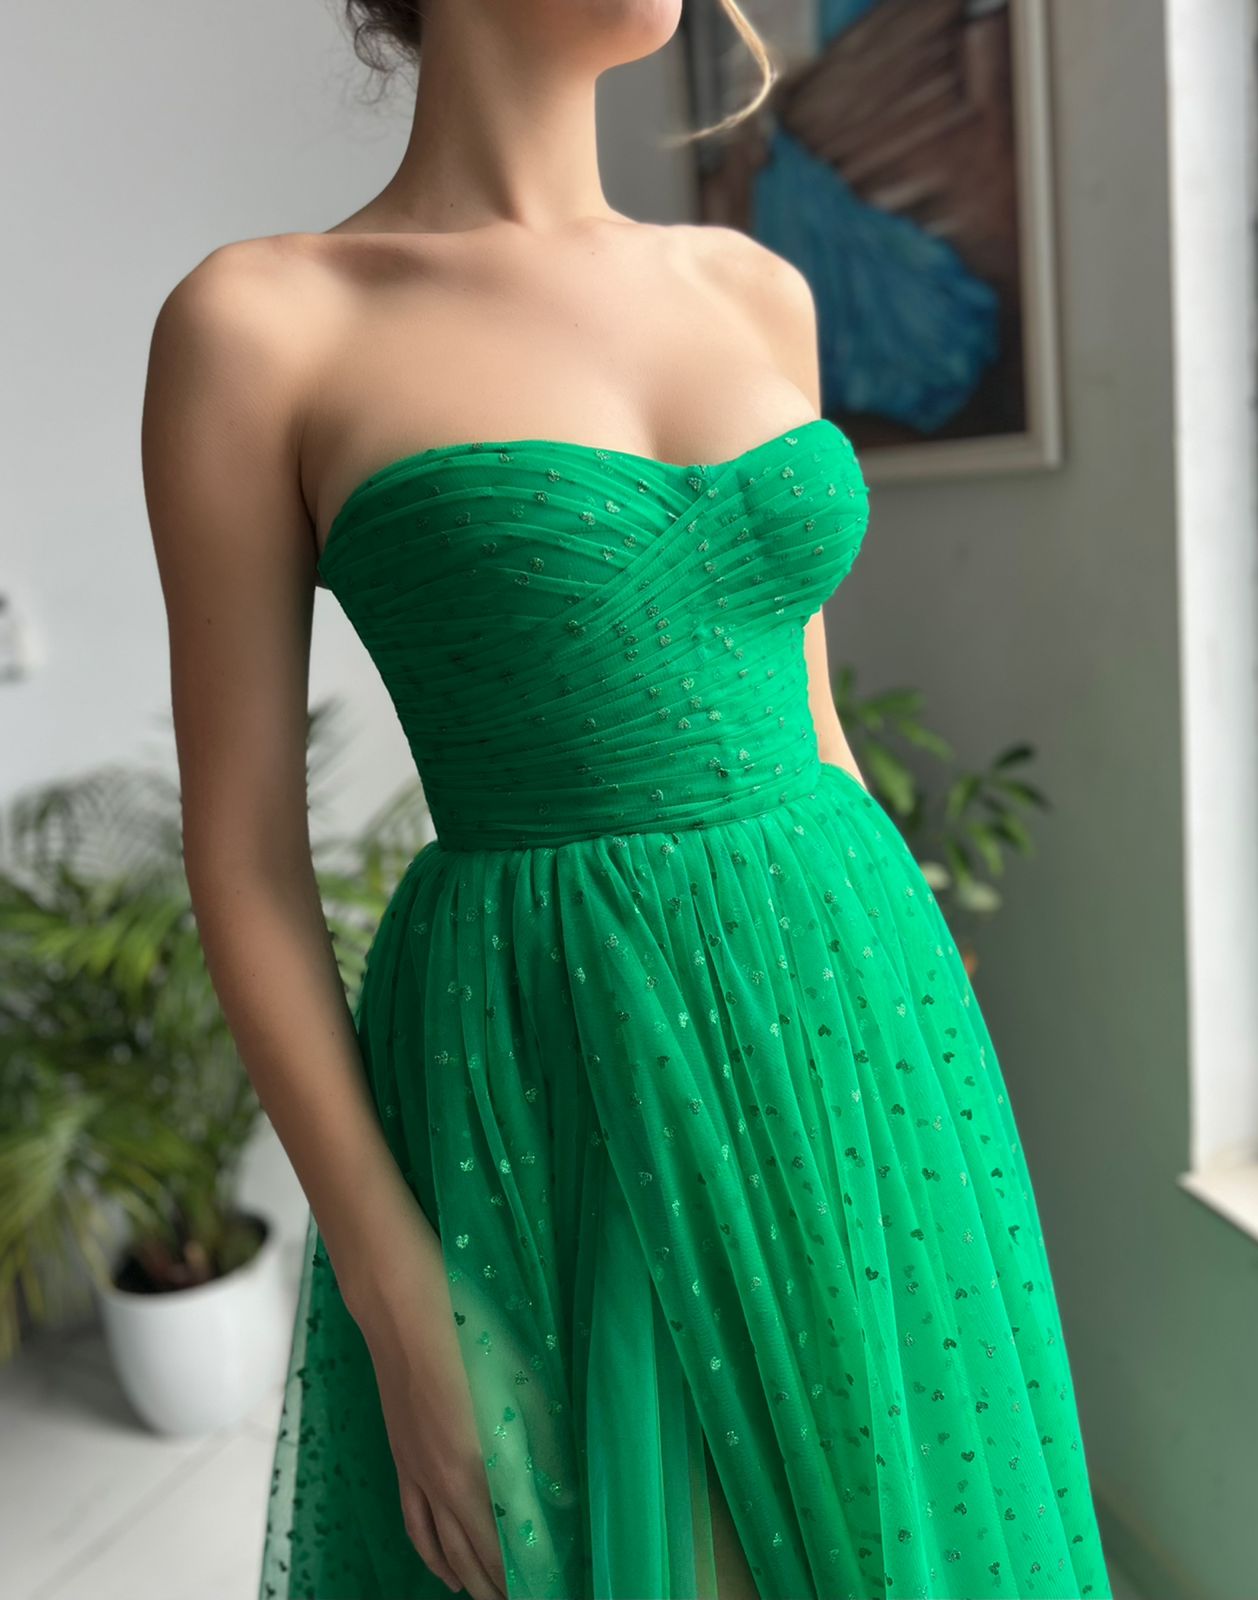 Green midi dress with no sleeves and hearty fabric